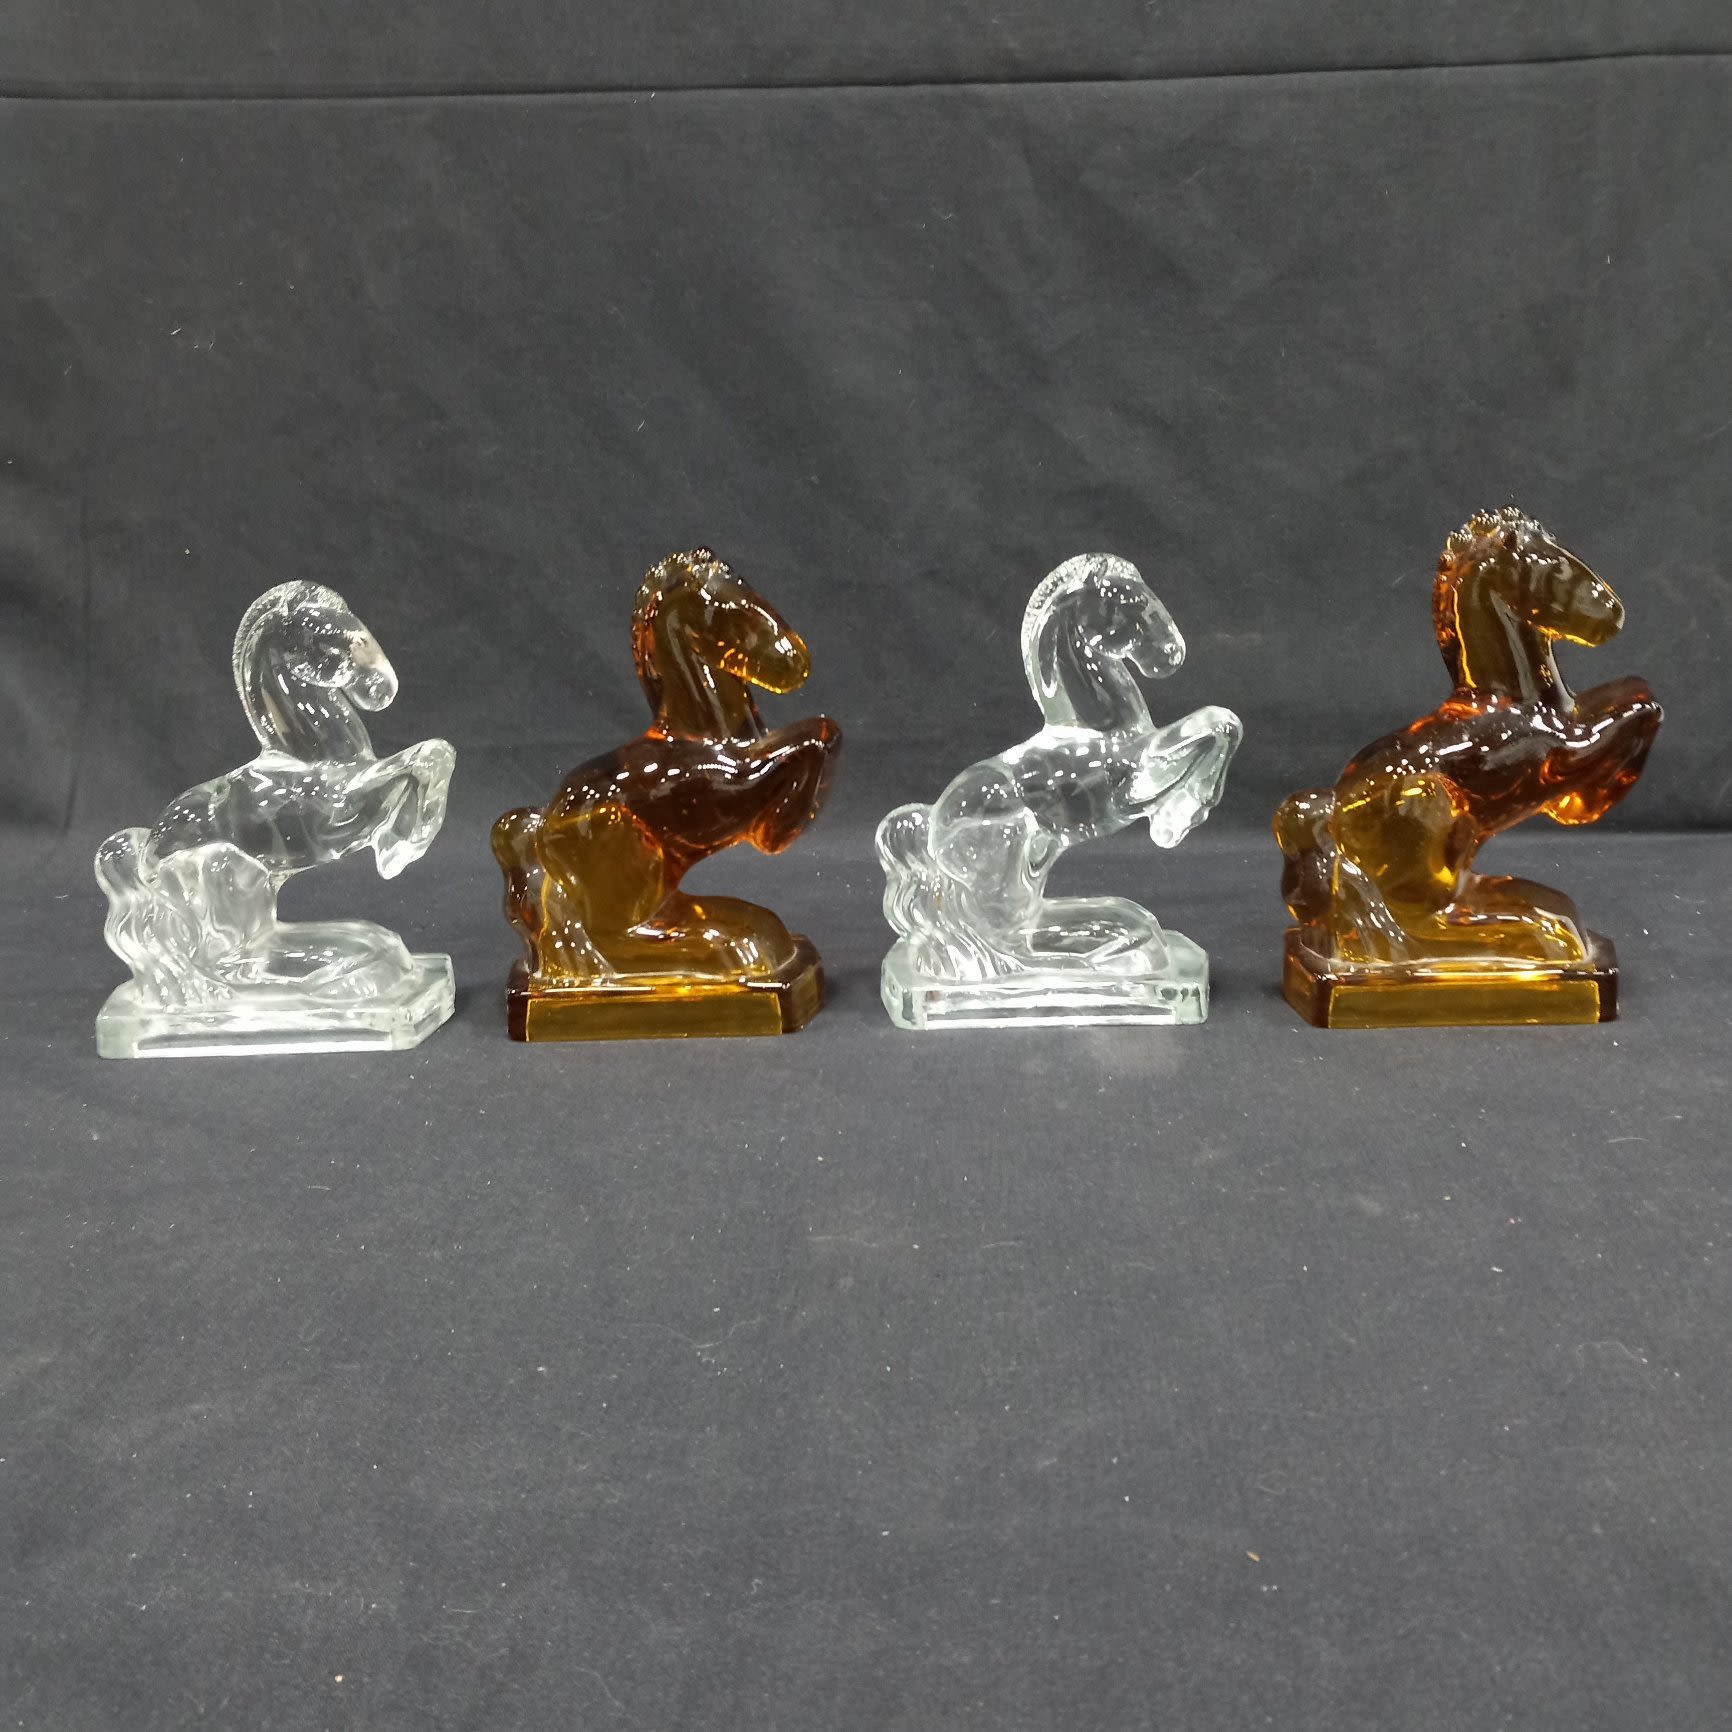 Buy the Set of 4 Glass Horse Sculptures/Figurines/Bookends